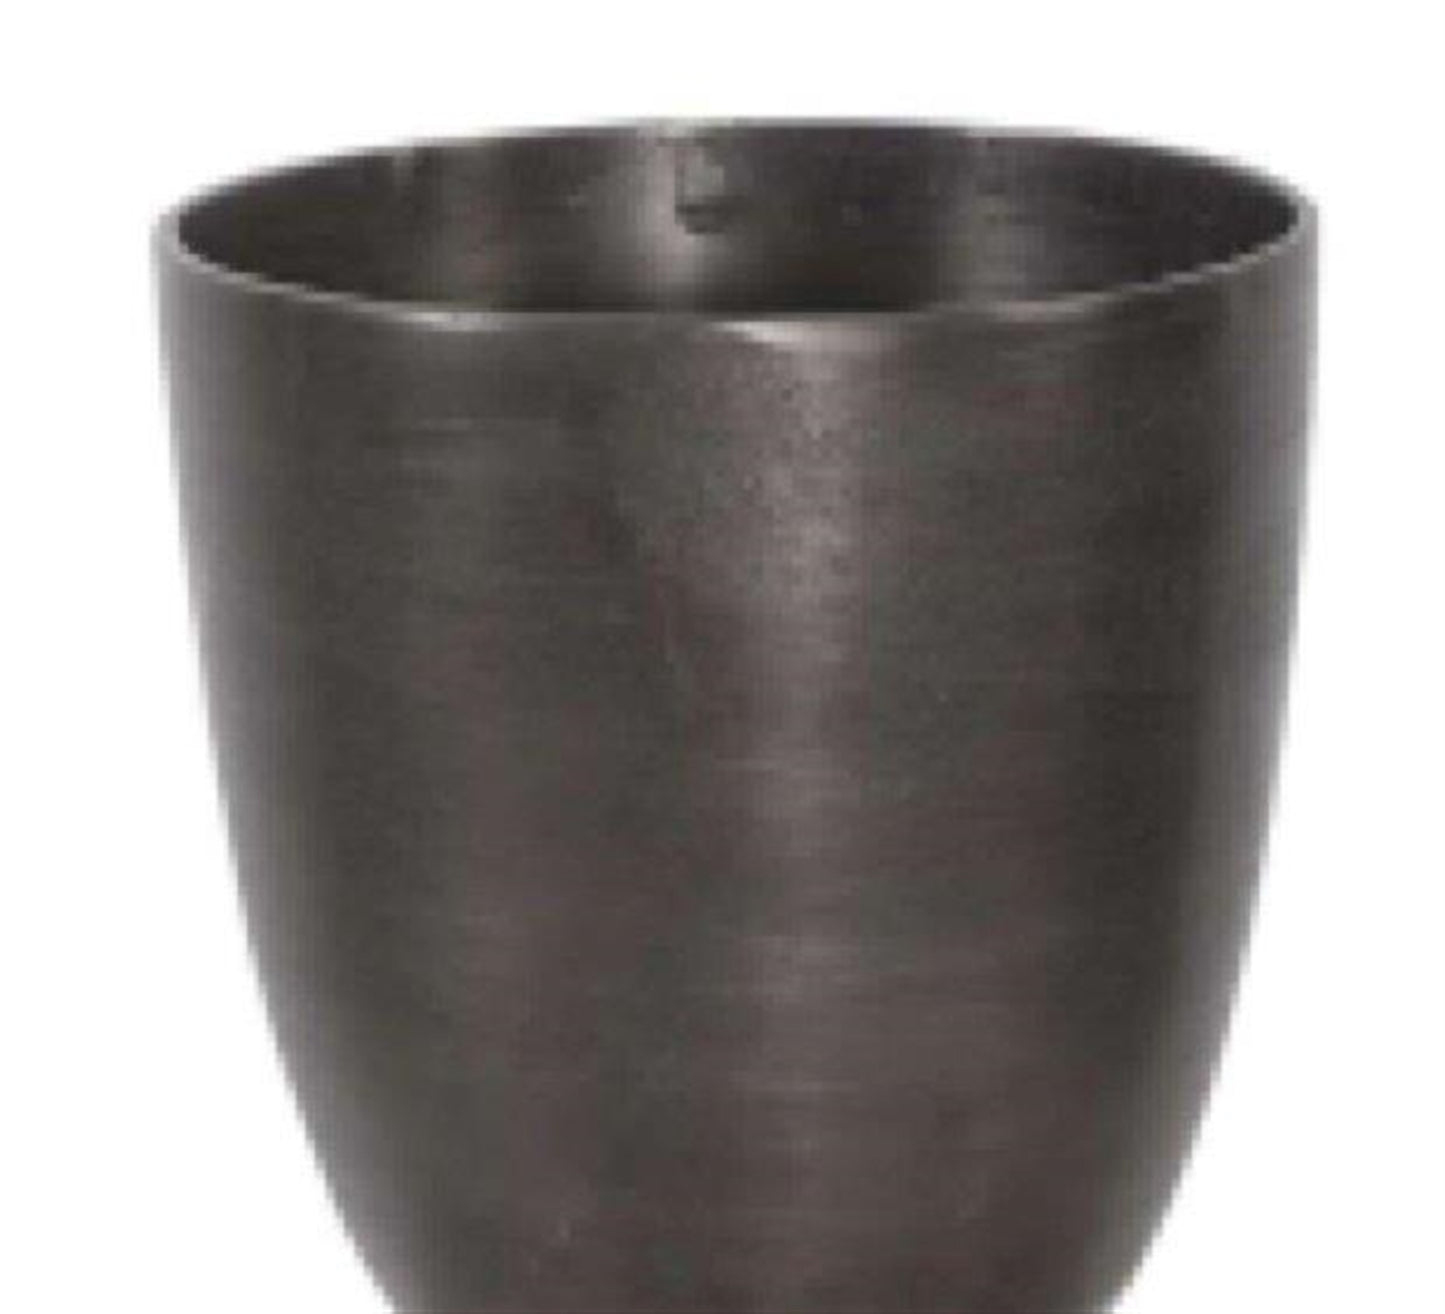 Aluminum Planter or Vase with Handles 12.75"H